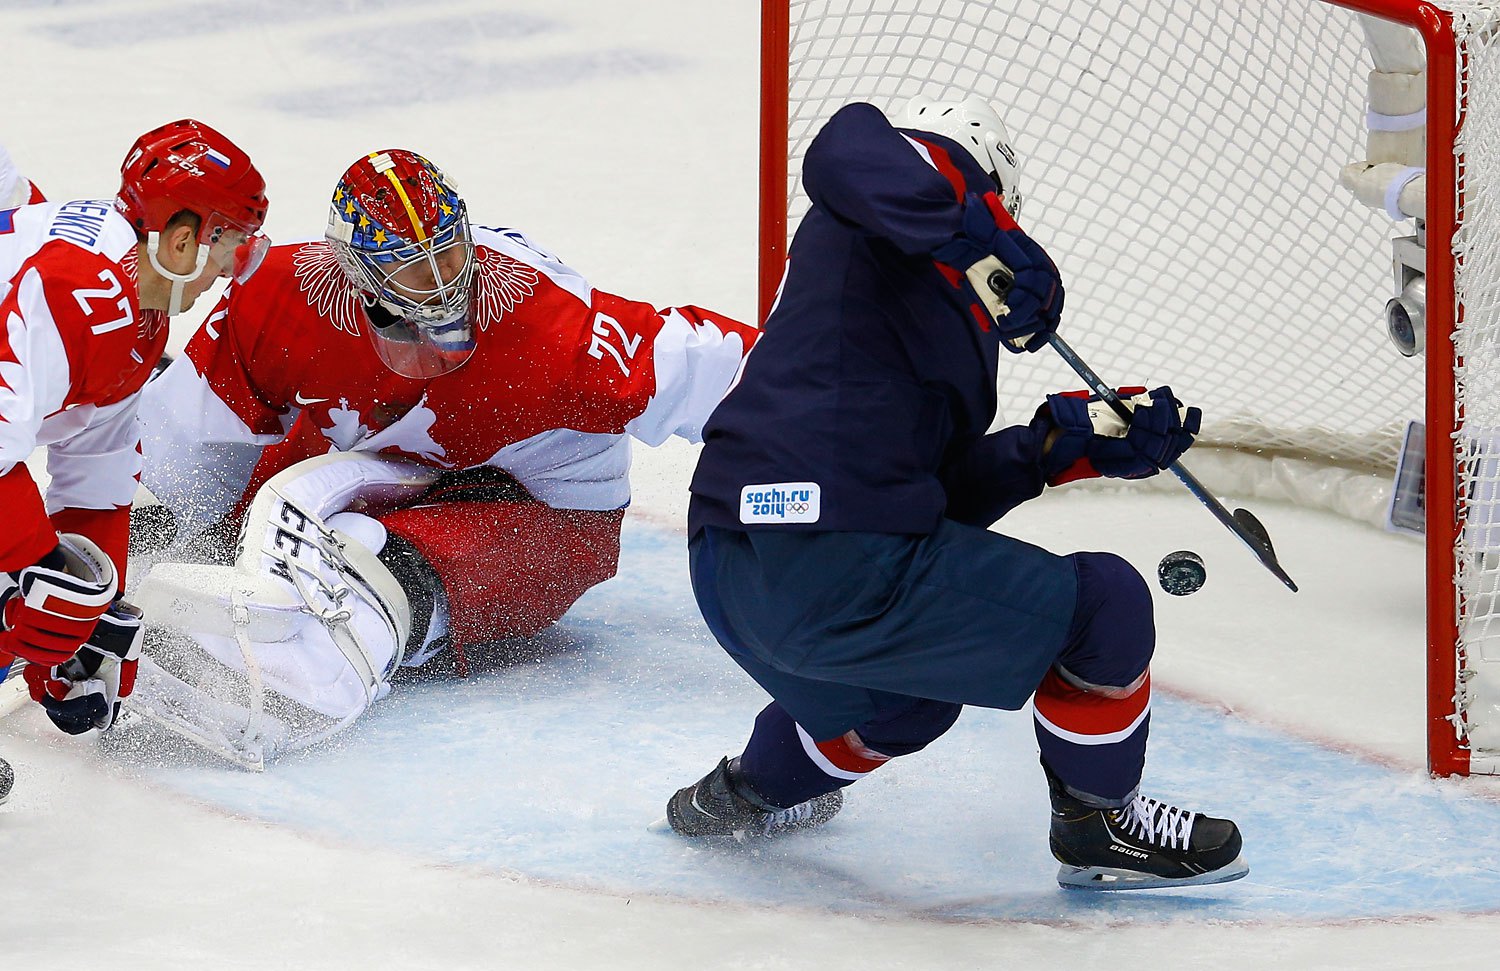 Team USA's Cam Fowler, right, scores on Russia's goalie Sergei Bobrovski and Russia's Alexei Tereshenko during the second period of their men's preliminary round ice hockey game.